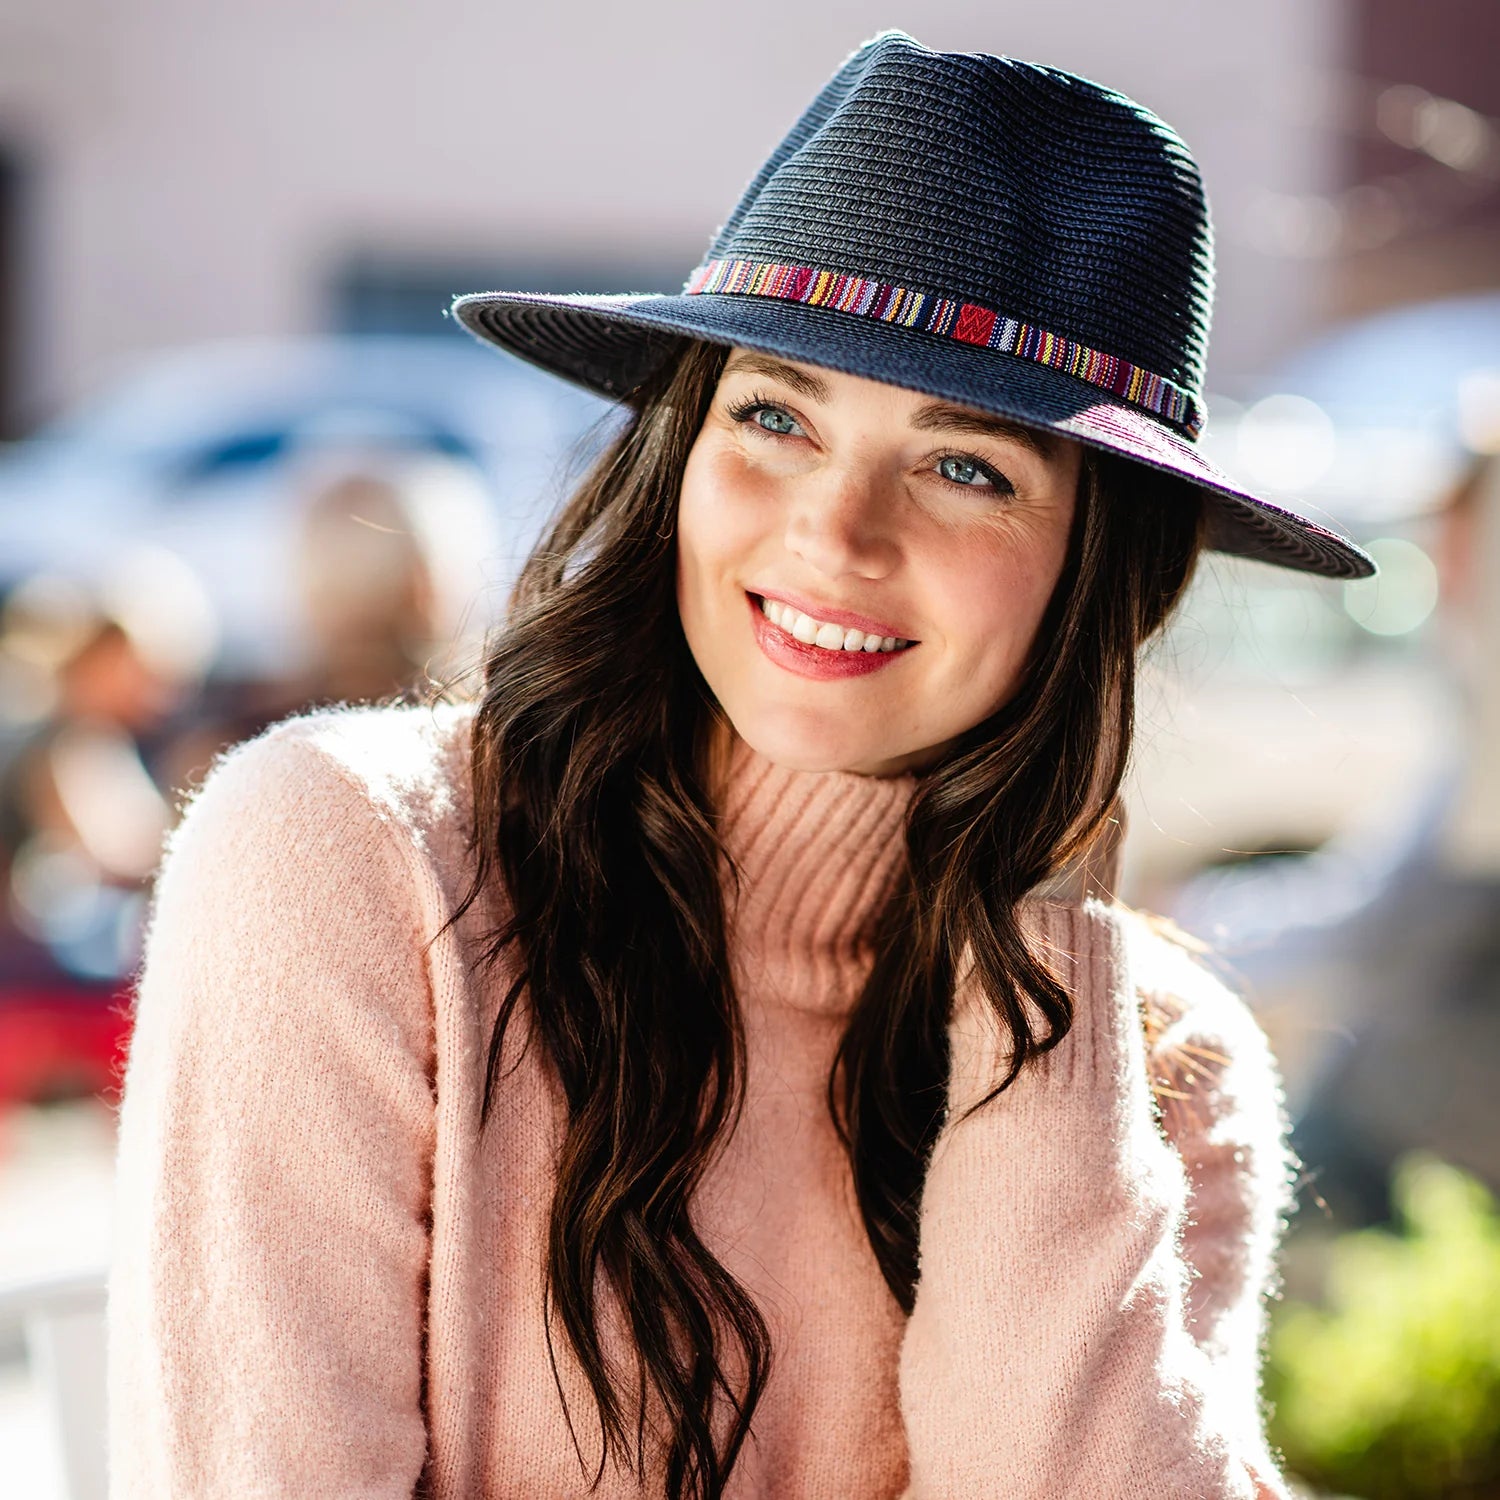 The multicolour, embroidered band gives the Sedona sun hat its distinctive style. The structured brim provides significant shade and sun protection for carefree days outdoors. Its packable construction folds up for travel.